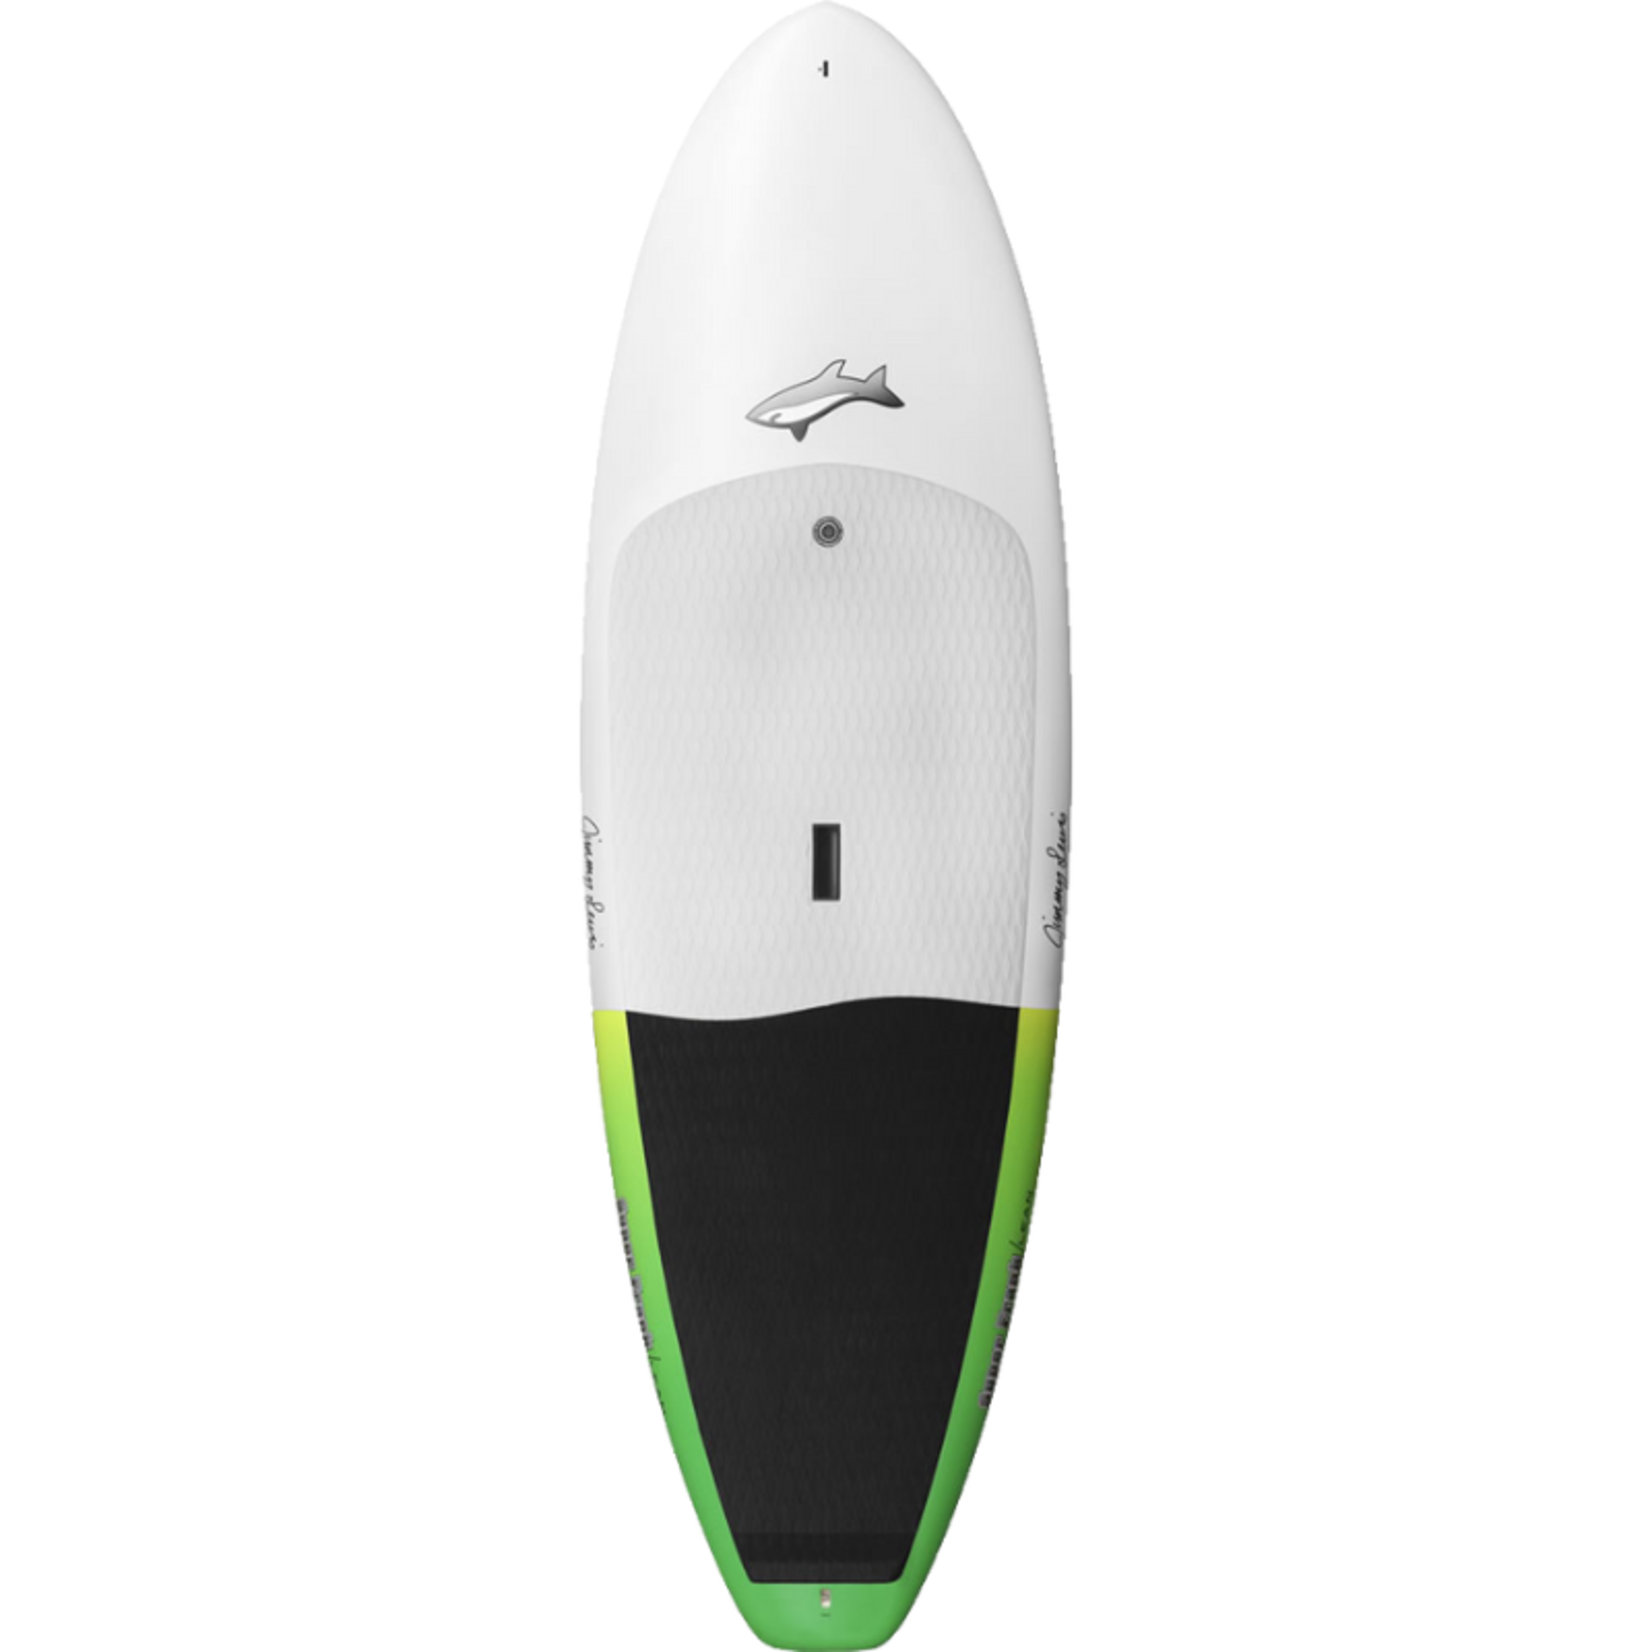 Jimmy Lewis 9'0 Jimmy Lewis Green Super Frank Surf SUP Wide